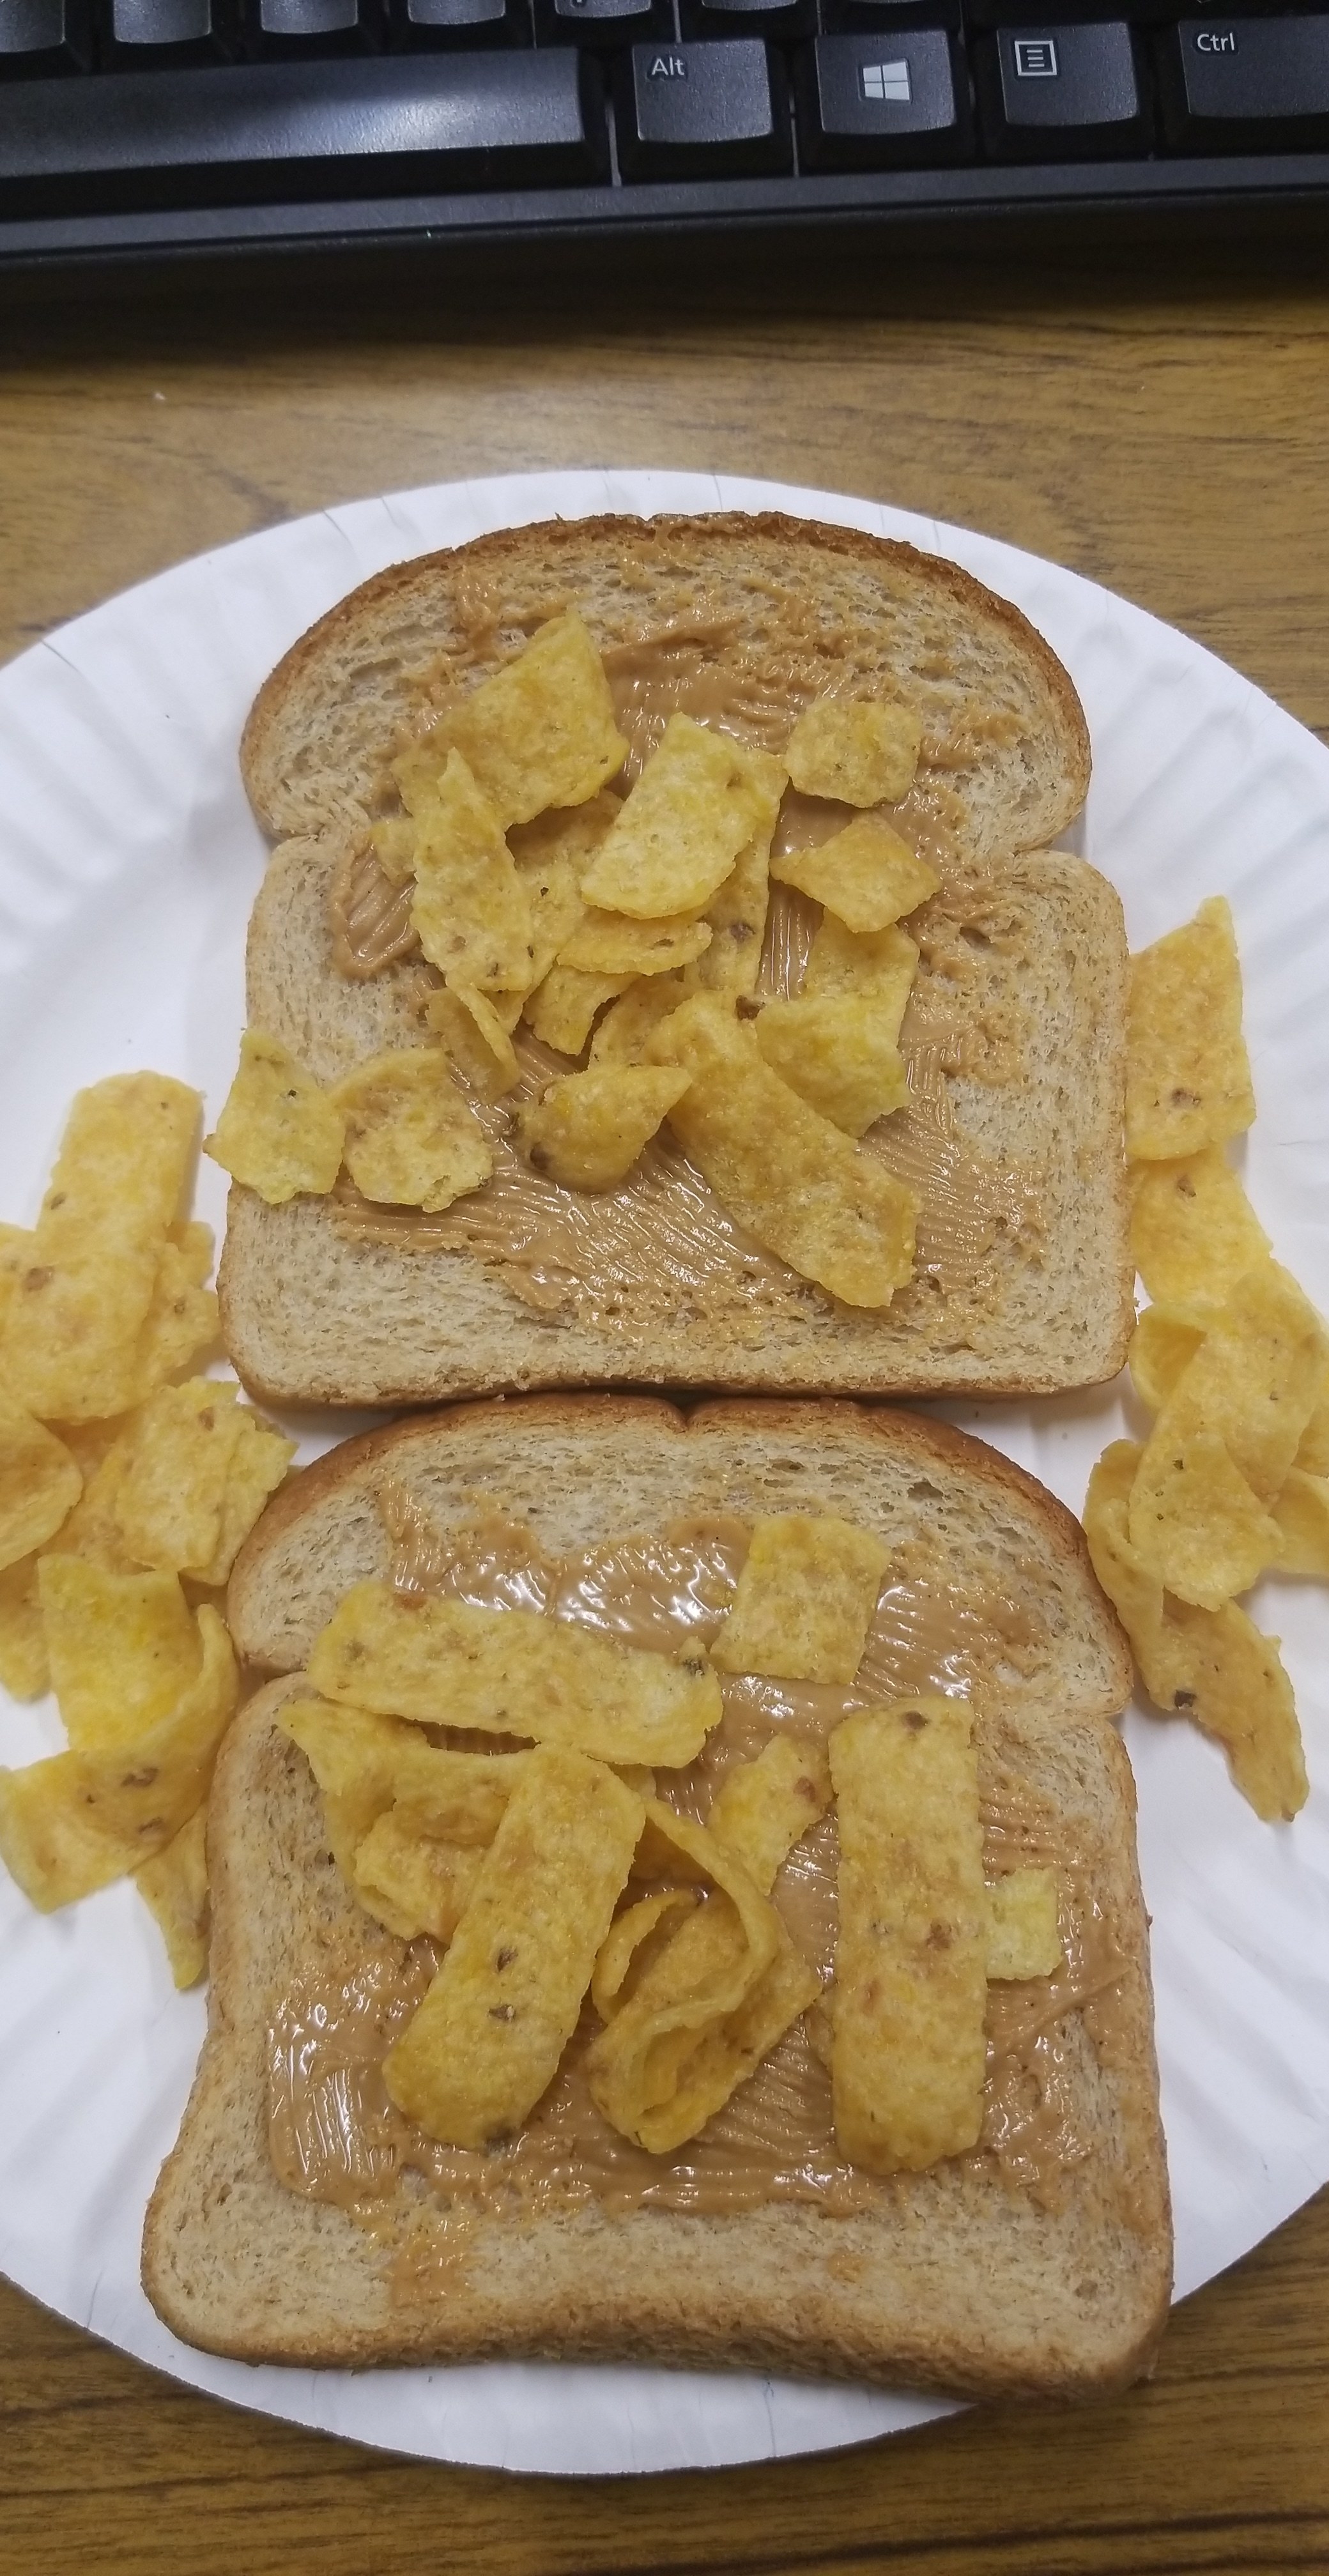 Peanut butter on bread with Fritos.